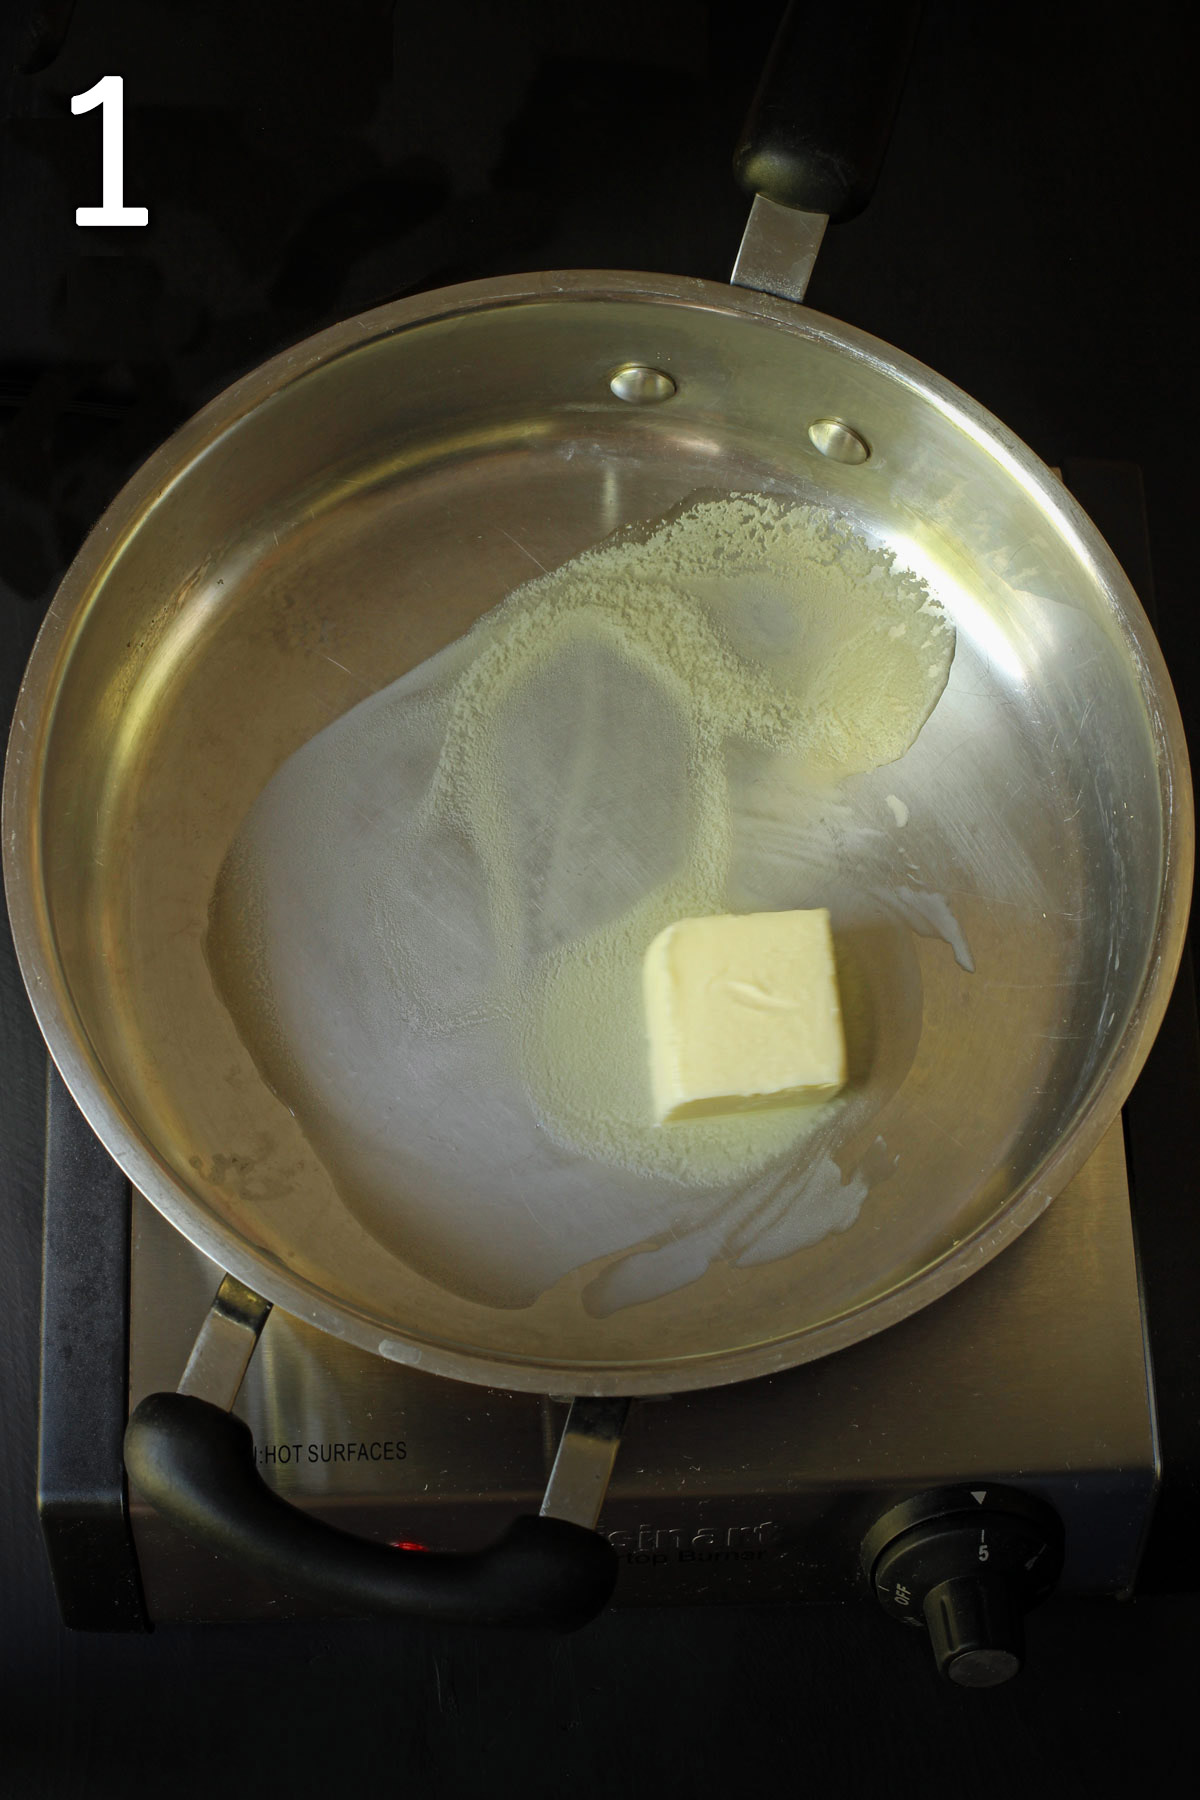 melting butter in shallow pan.